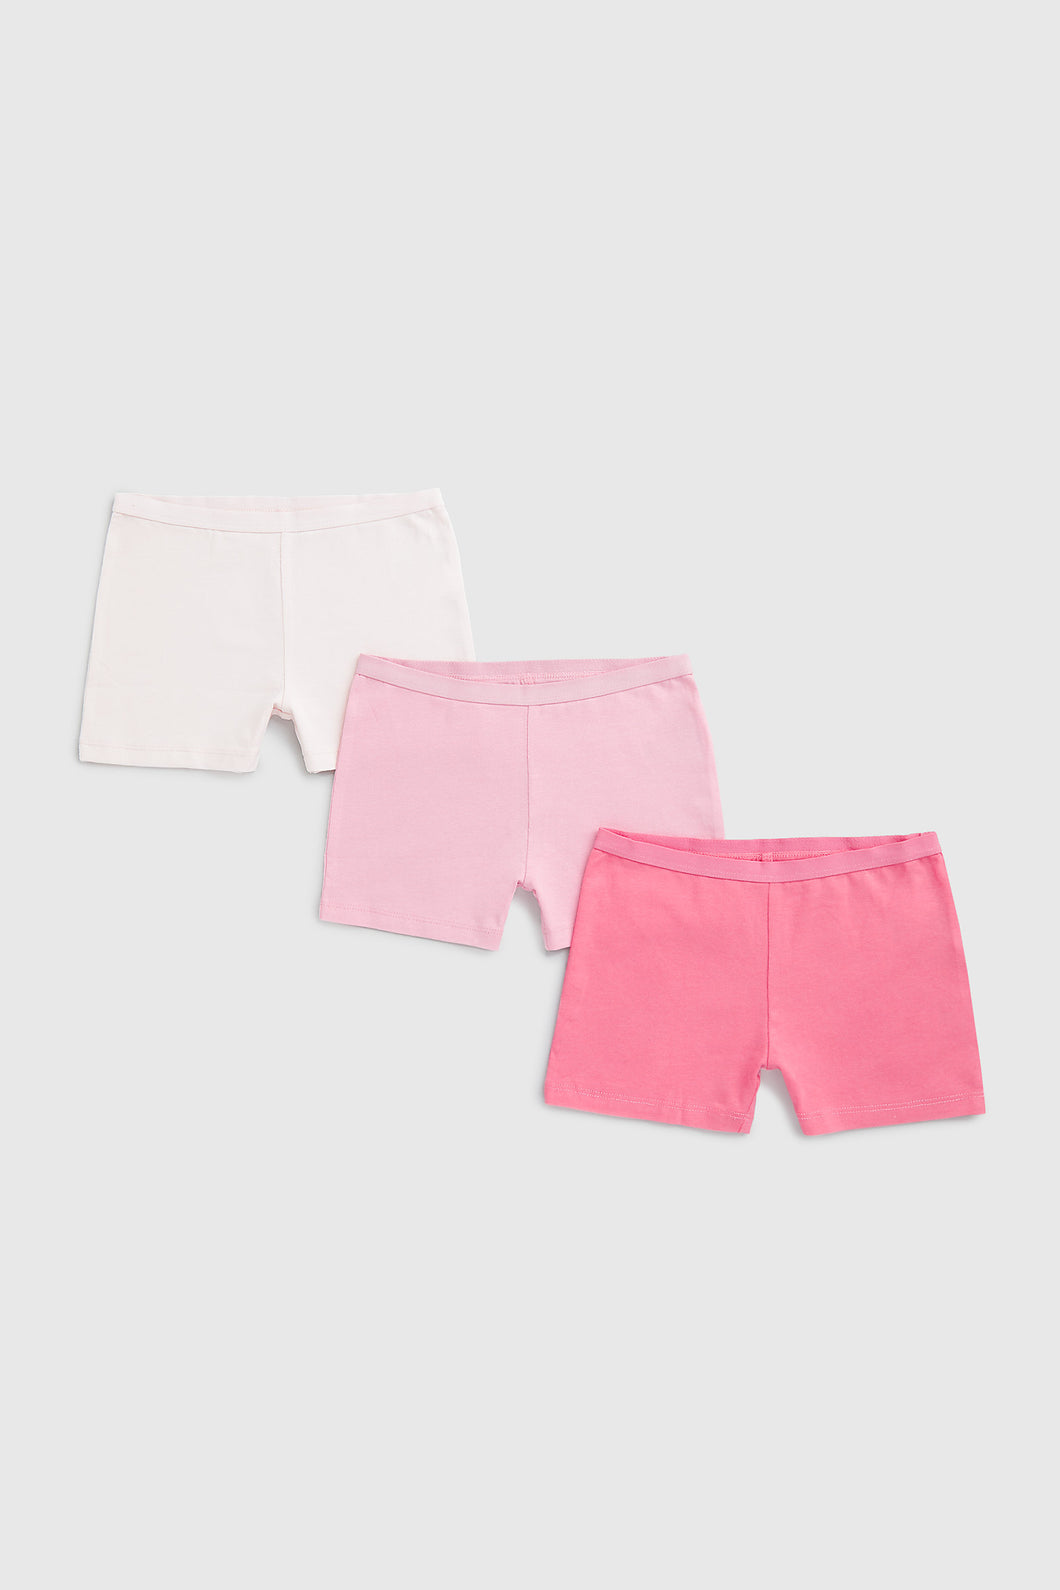 Mothercare Pink Short Briefs - 3 Pack